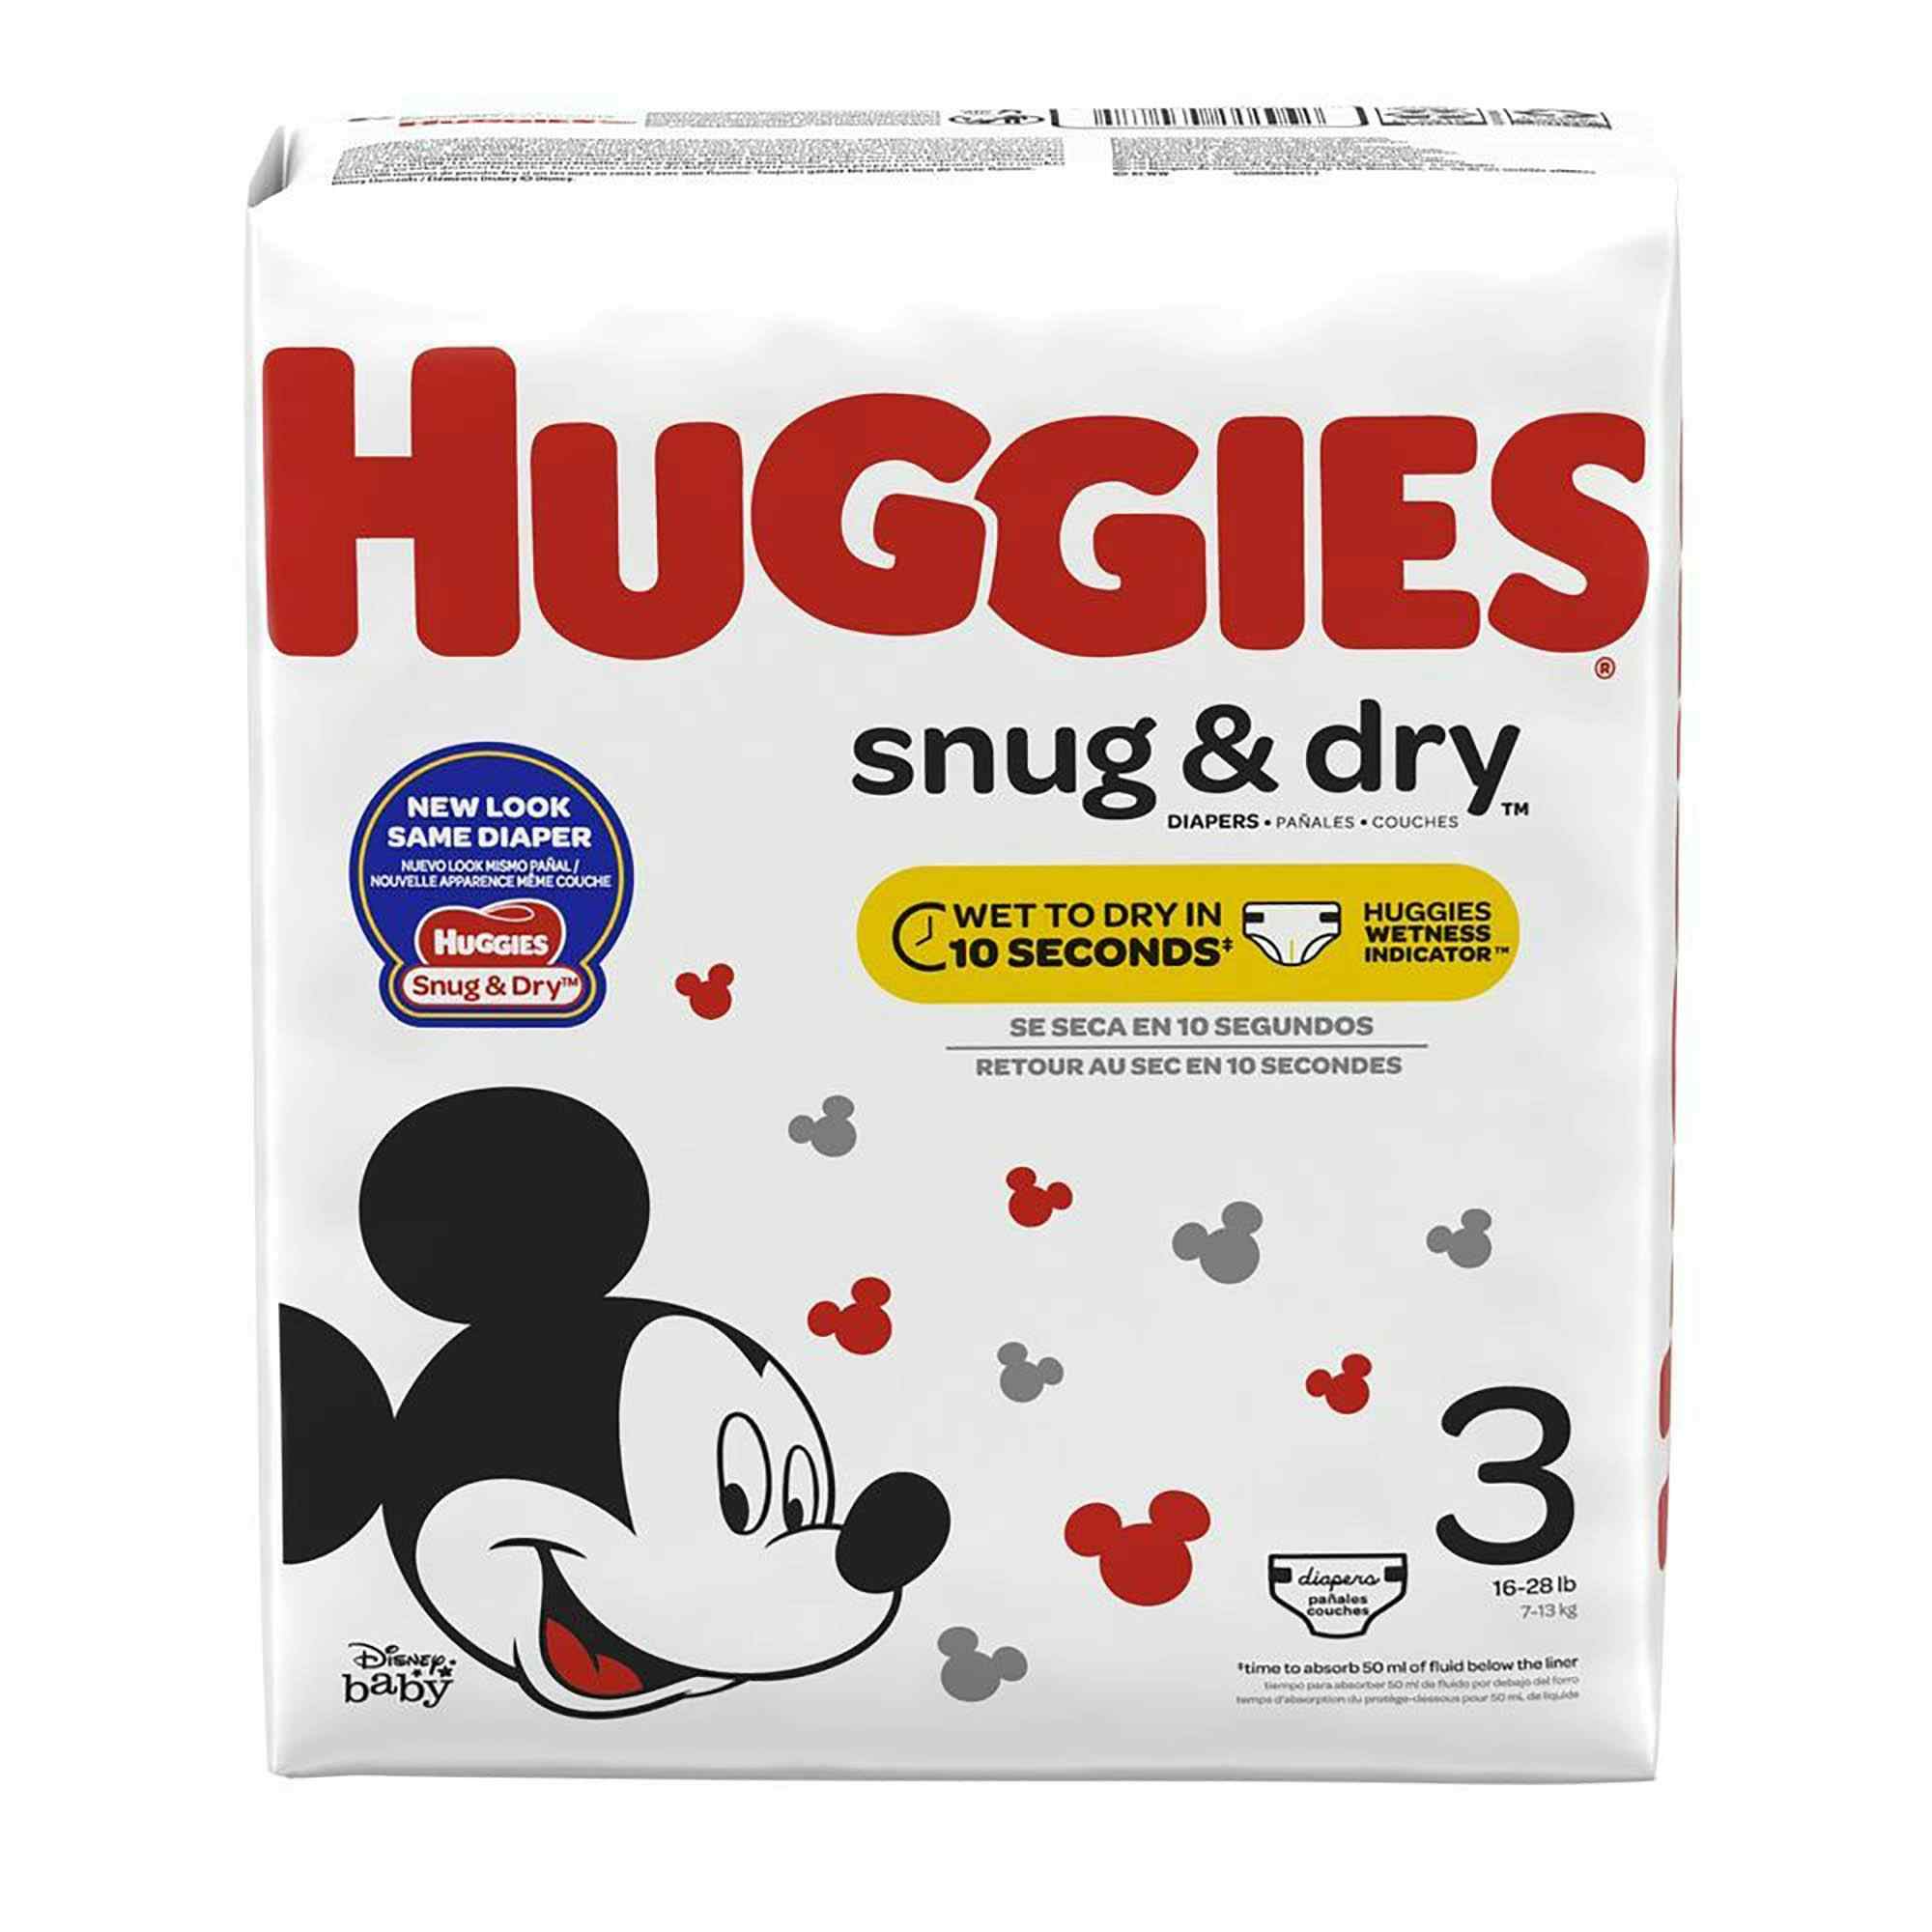 Huggies Snug & Dry Baby Diapers with Tabs, Heavy Absorbency, 51471, Size 3 (16 to 28 lbs.) - Pack of 31